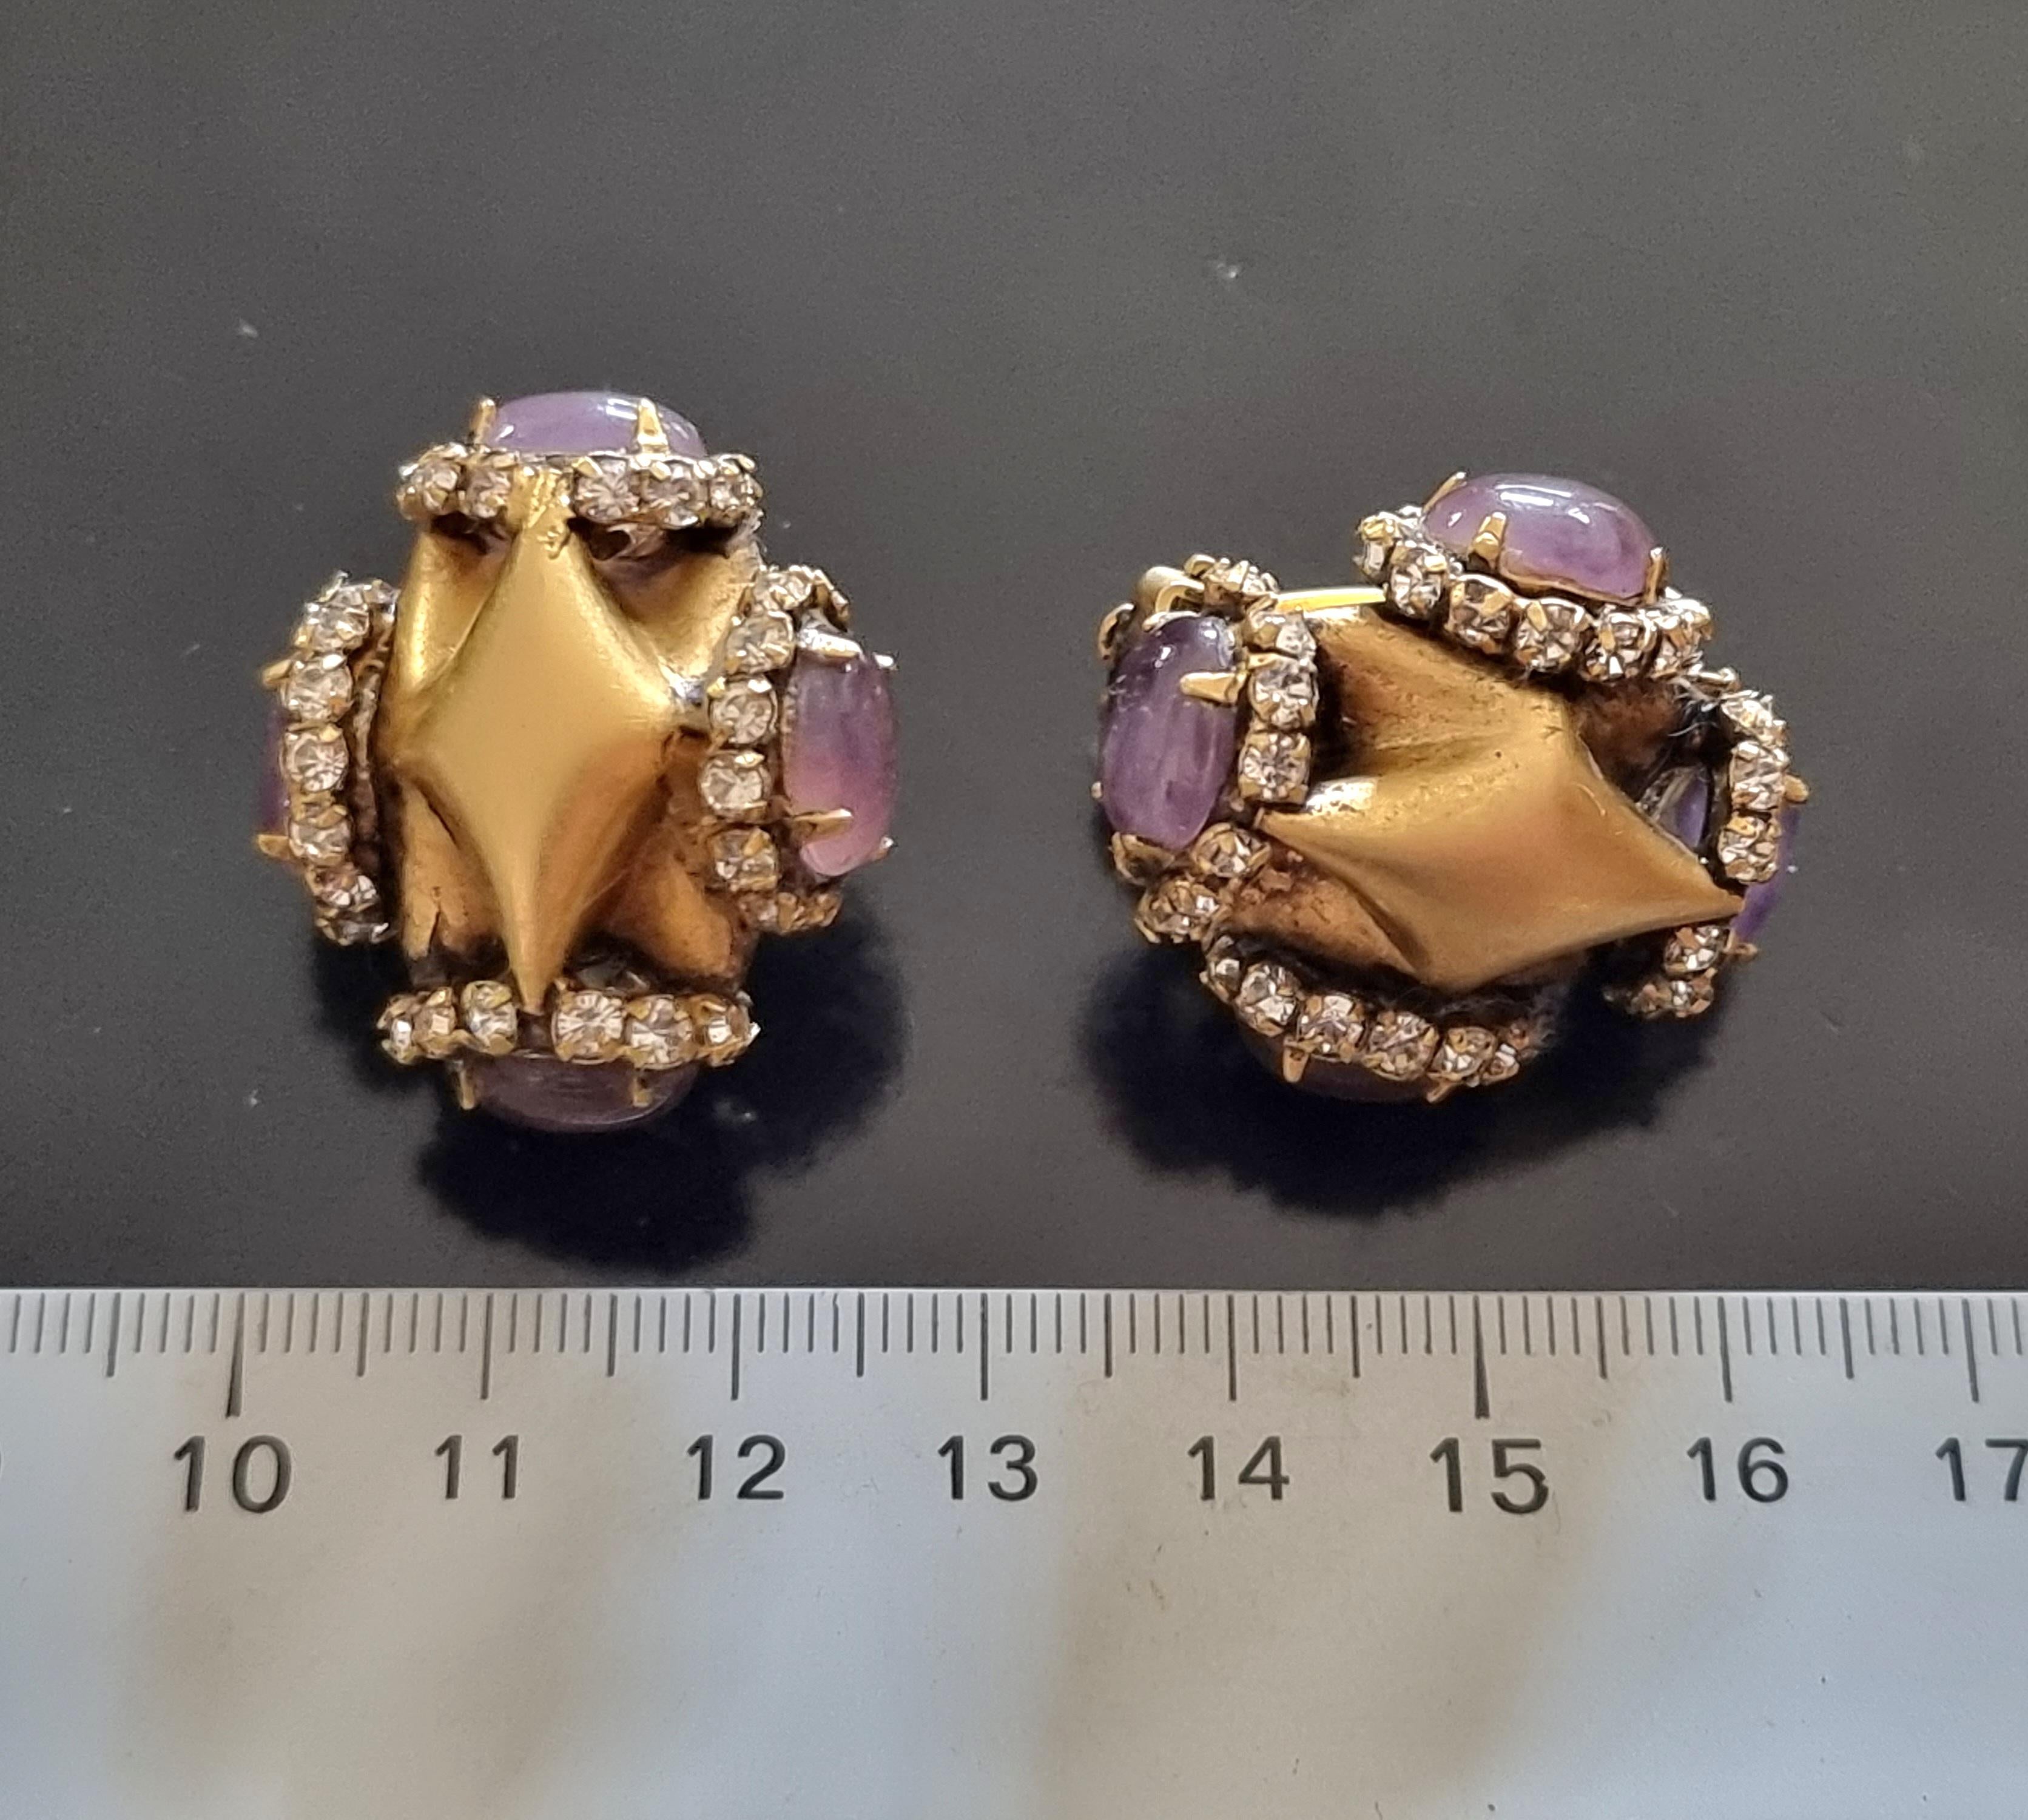 Iradj Moini, Clip-on EARRINGS, vintage, glass cabochons, rhinestones For Sale 7